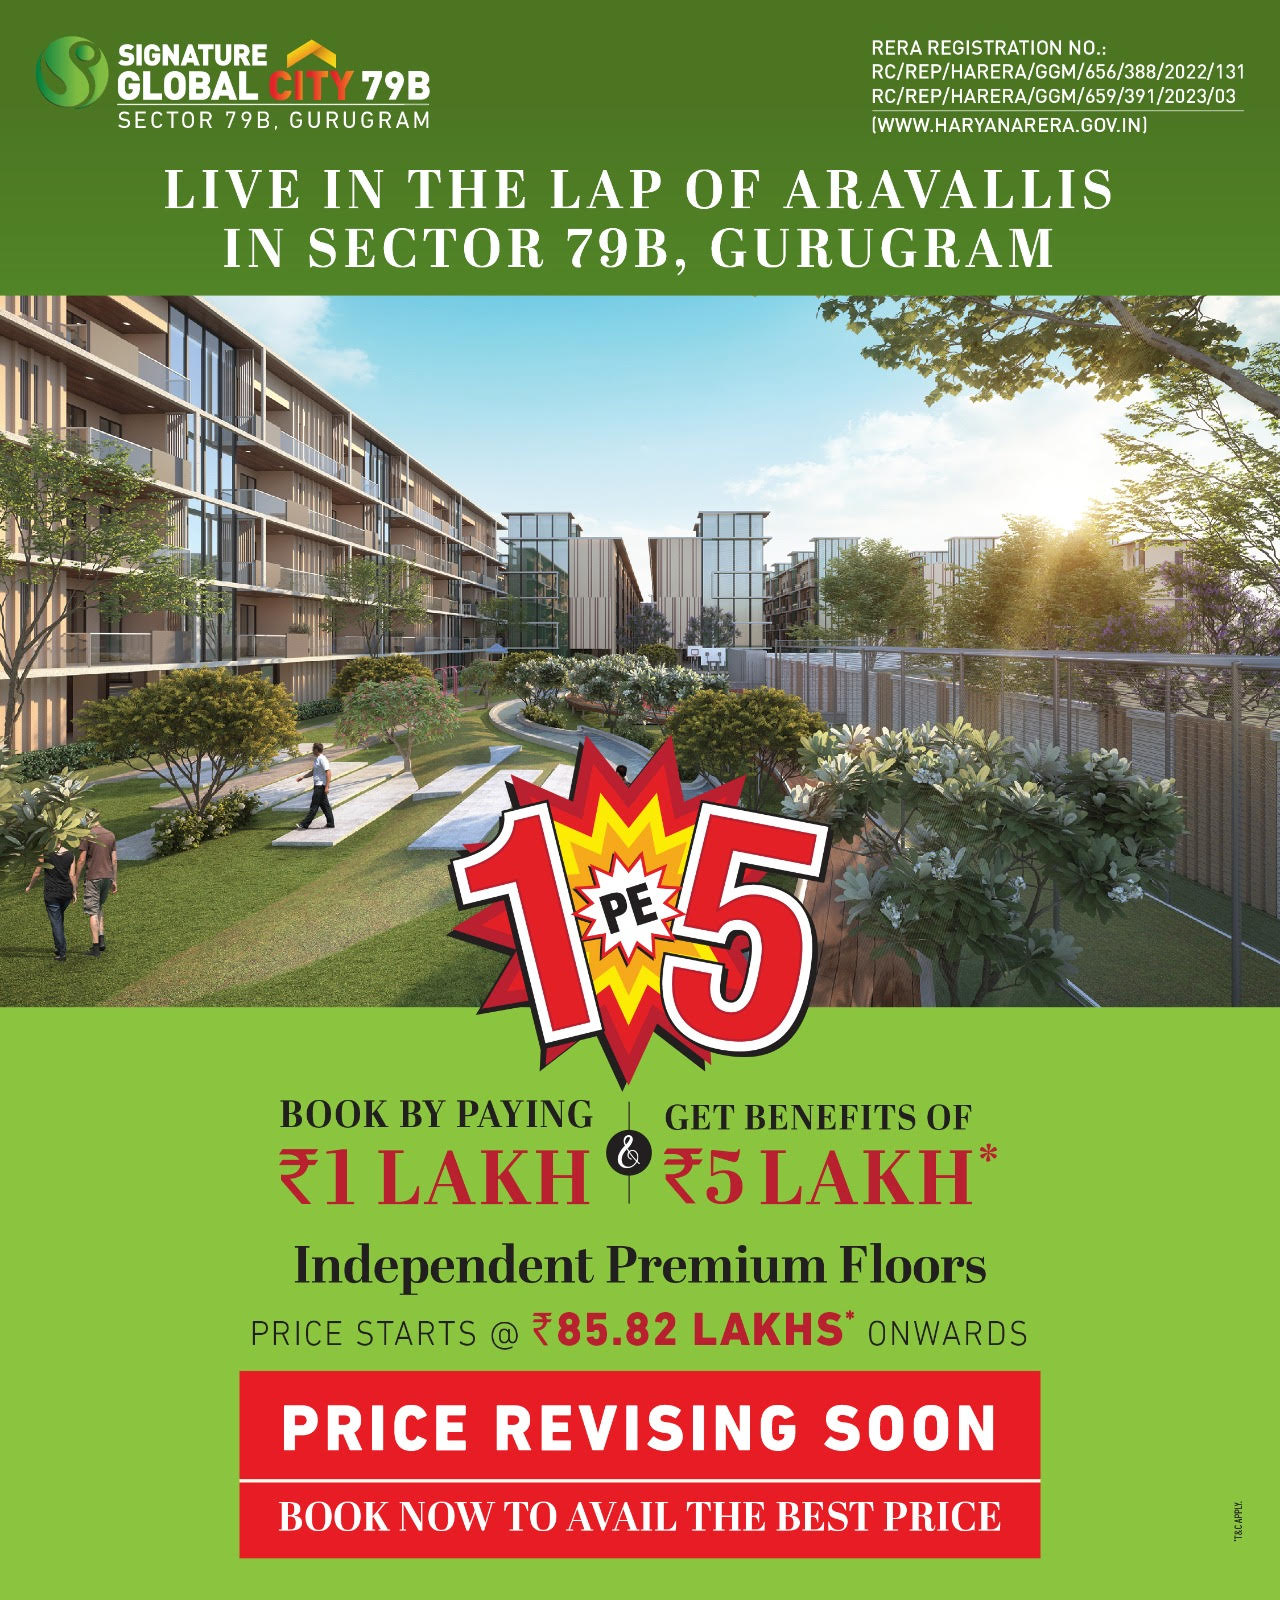 Hurry secure your dream home now before prices revise for Signature Global City 79B, Gurgaon